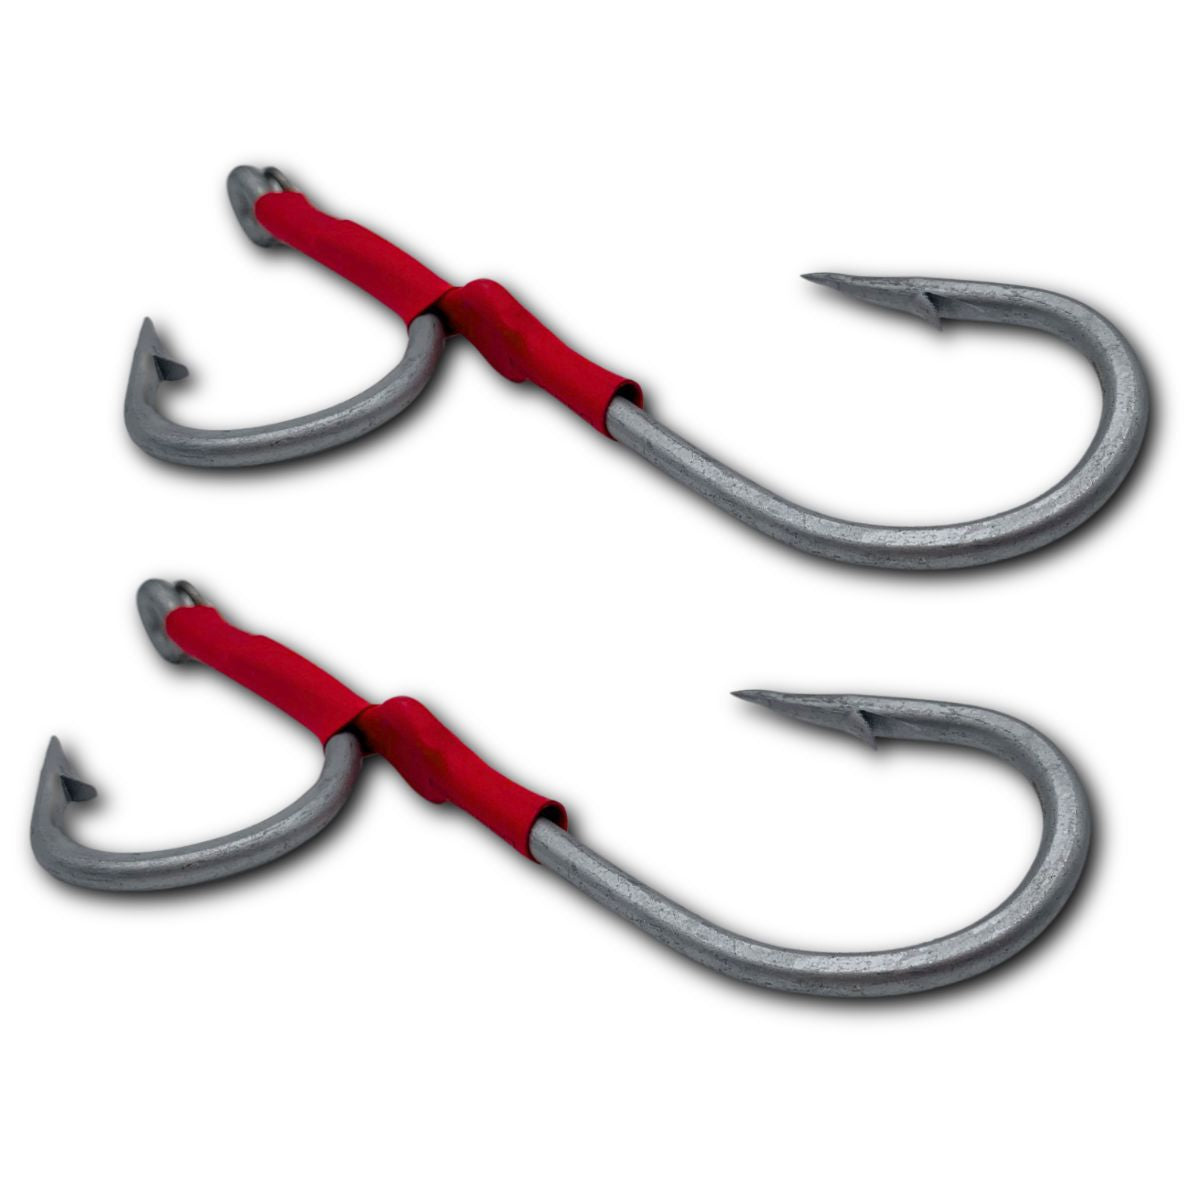 Kamikaze - 2 Game Lure Assist Hook 12-0 Rigs Twin Pack - South East Clearance Centre